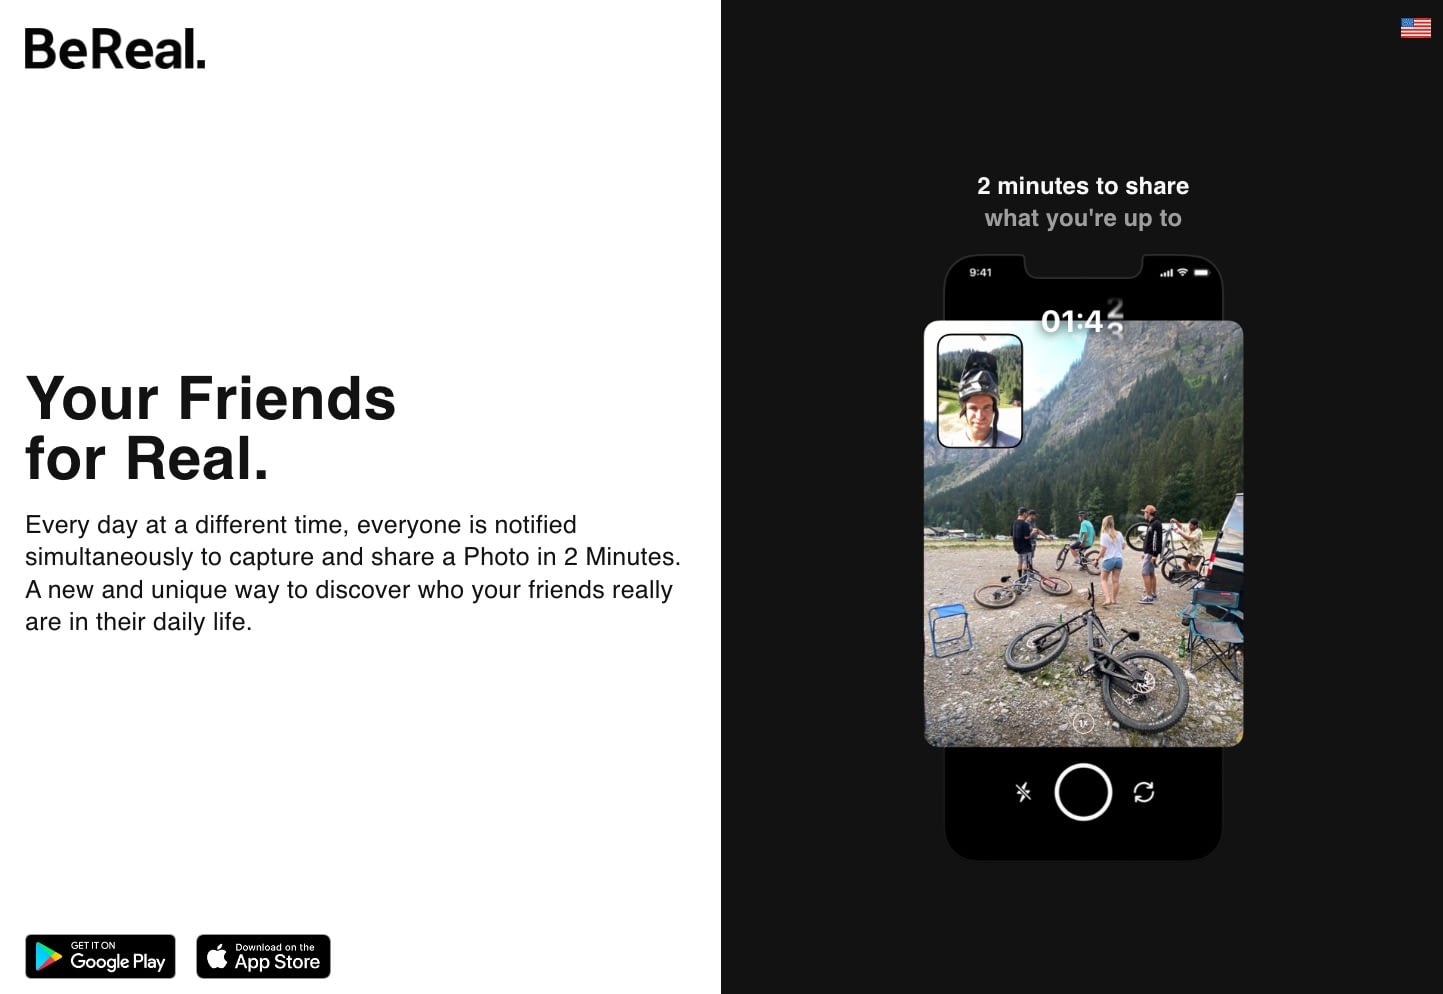 BeReal - an alternative for users who want to share photos first